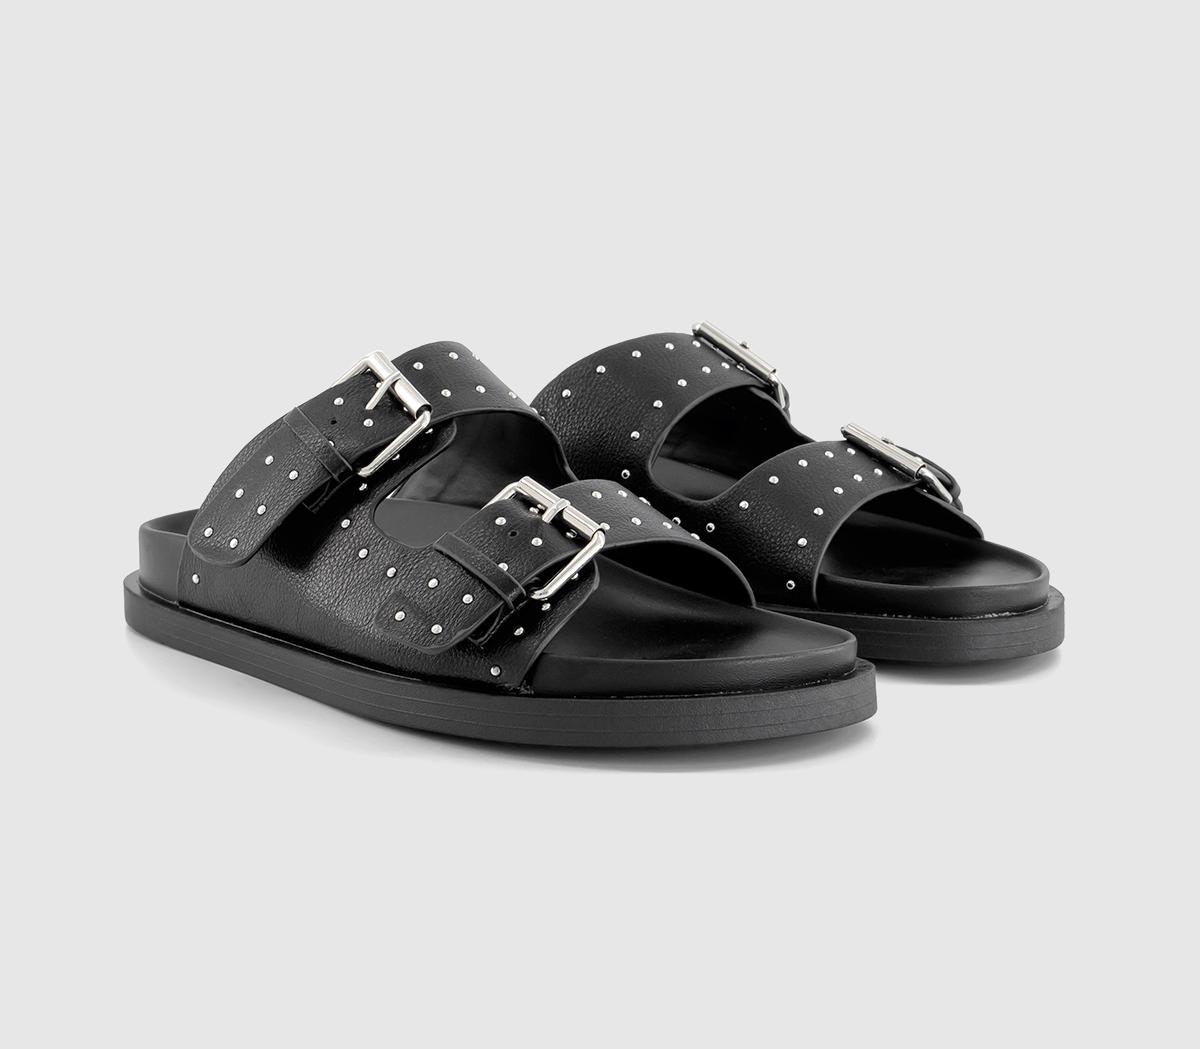 OFFICE Womens Scarlett Double Strap Studded Footbed Sandals Black, 4